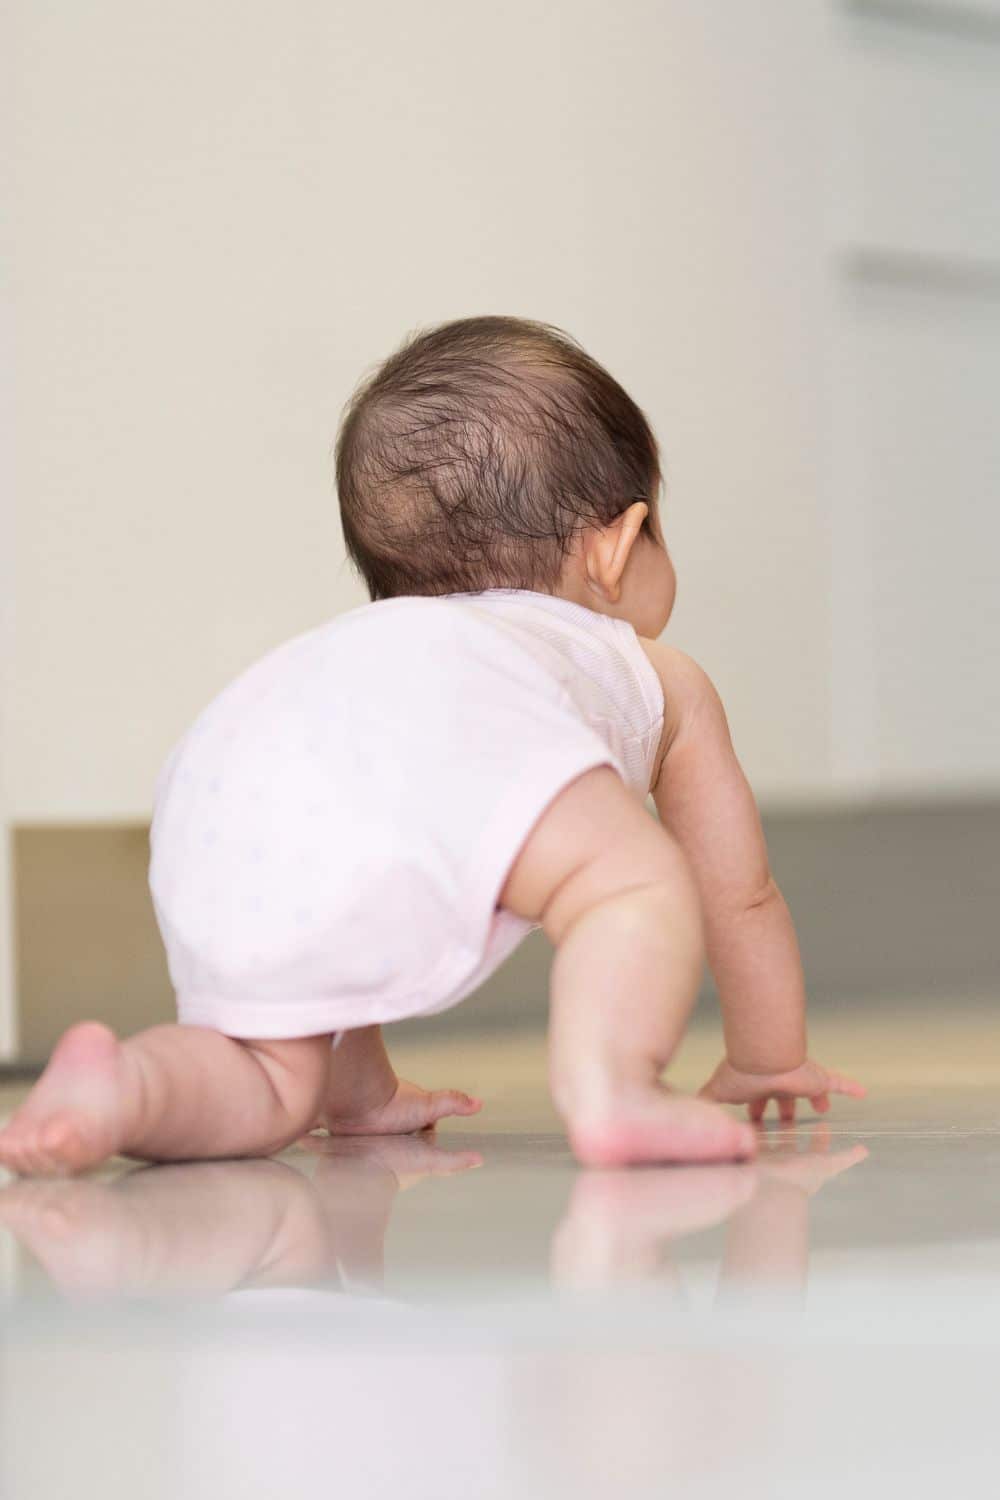 6 Helpful Tips On Preparing For Your Child's First Steps